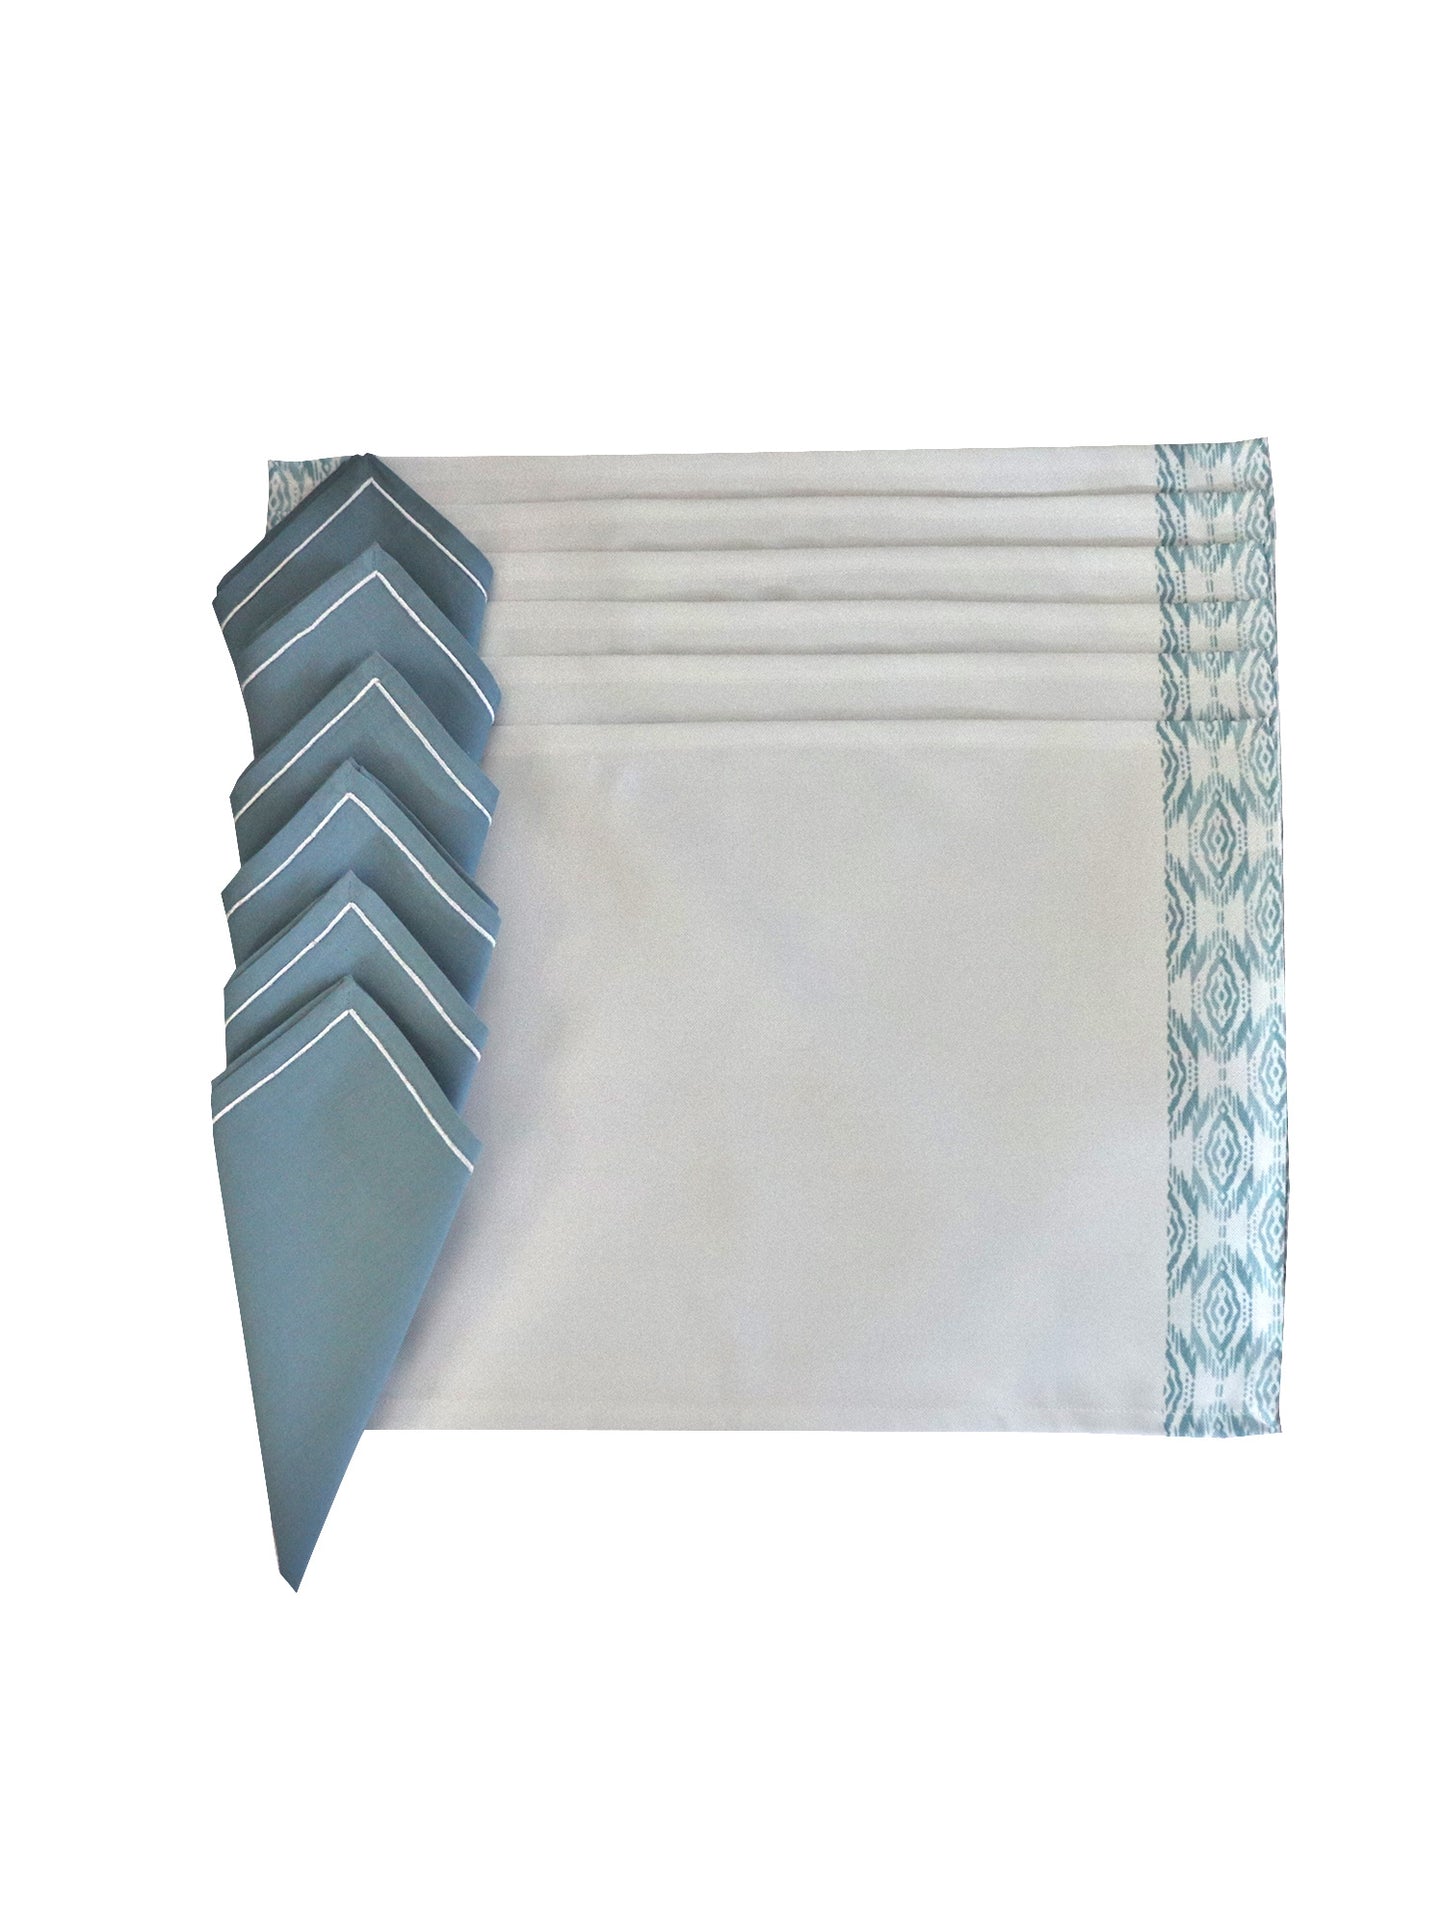 printed dinner placemats with embroidered napkins in light blue , set of 6 each - 13x19 inch